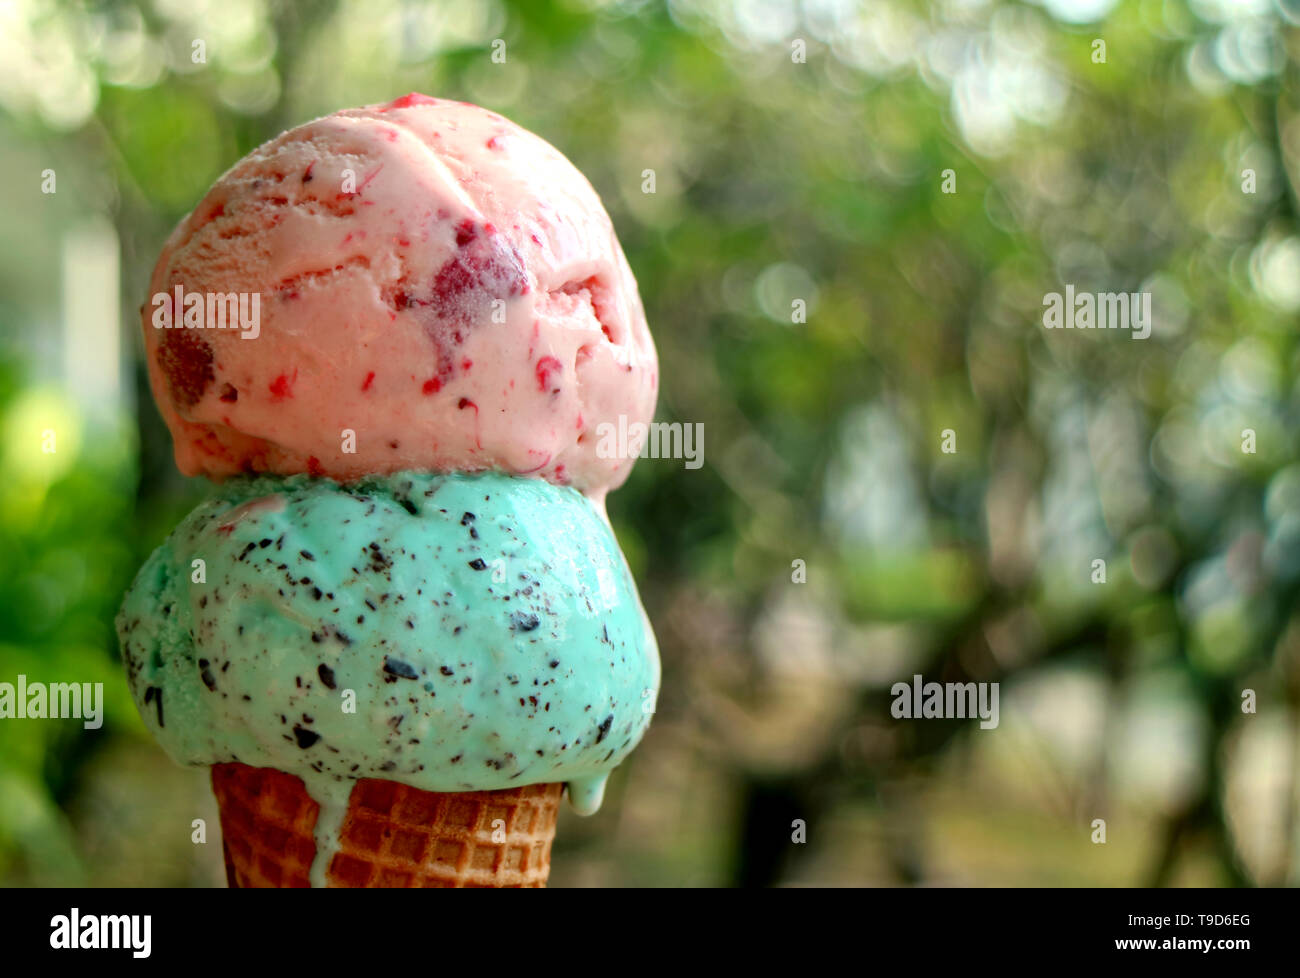 Melting two scoops of Ice cream cone in the sunlight against blurry green foliage Stock Photo